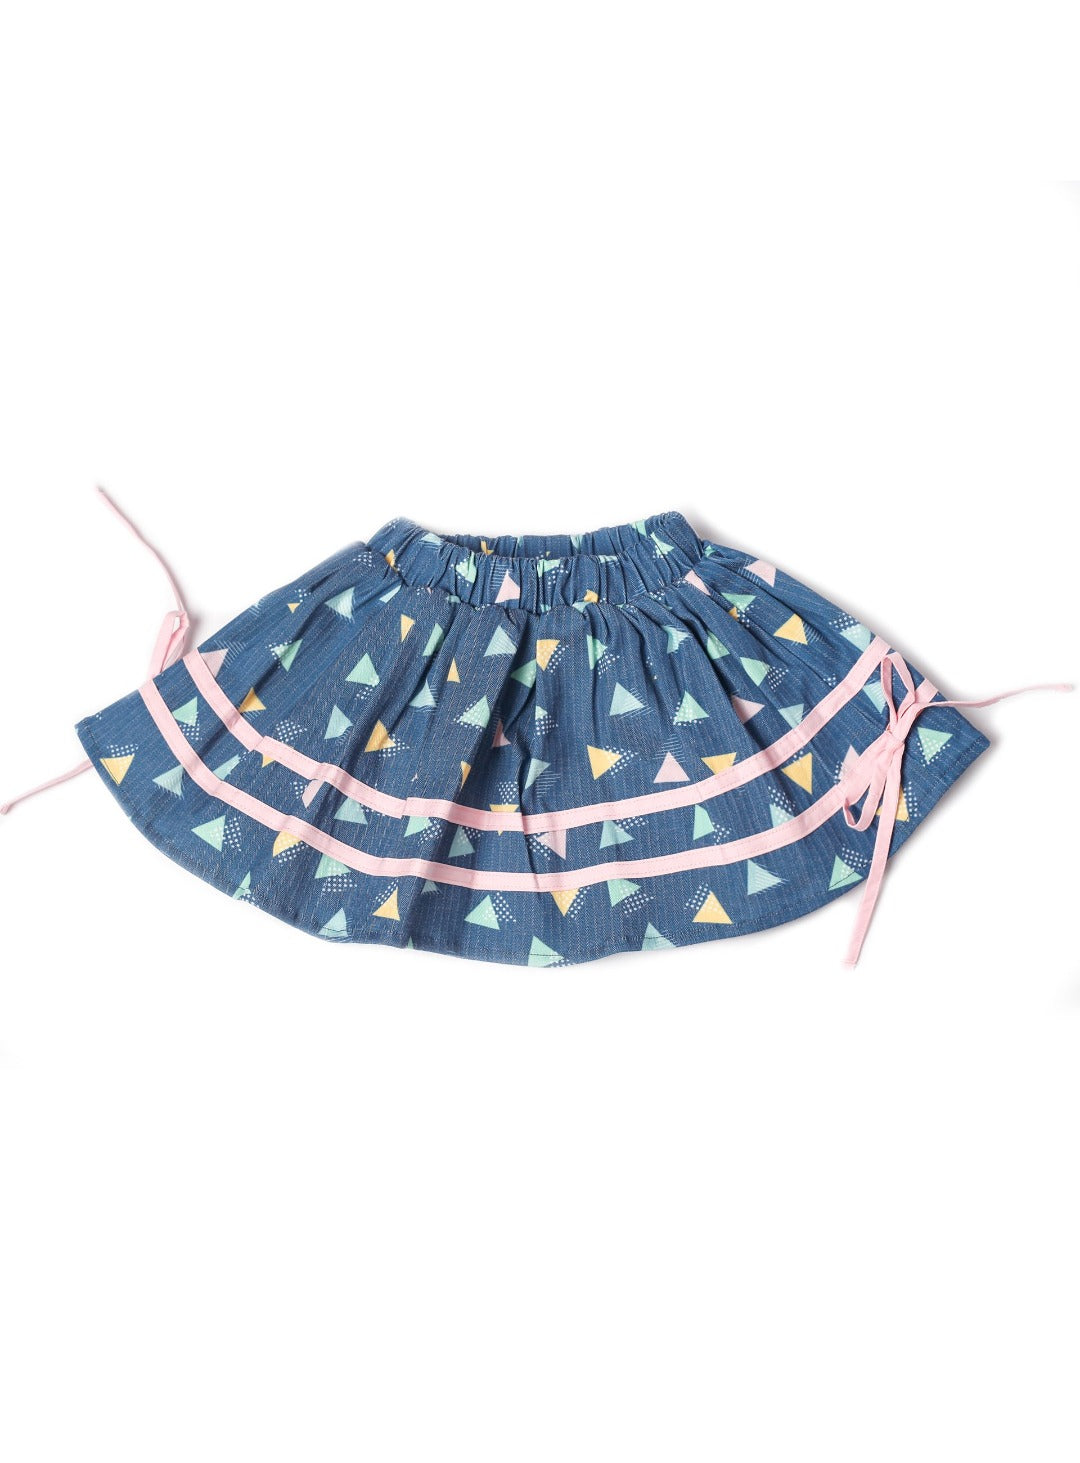 blue denim skirt with colourful triangle pattern